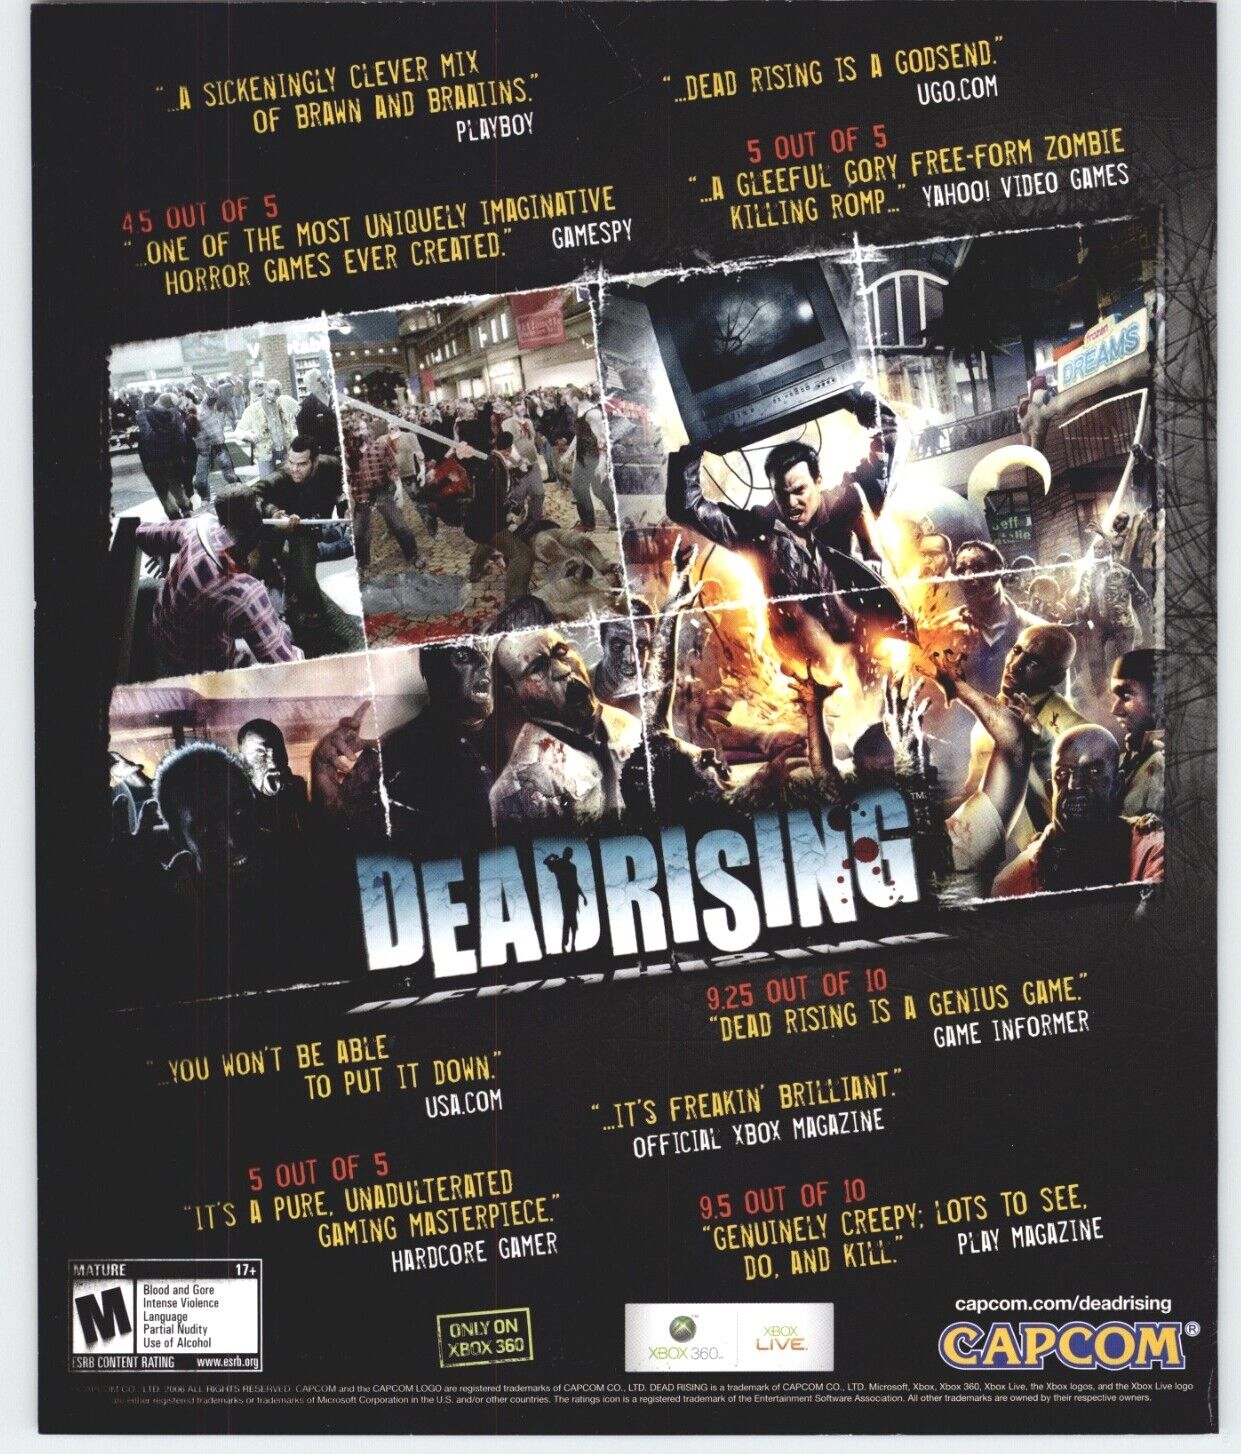 Dead Rising Xbox 360 Video Game Horror Art 2006 Vintage Print Ad Poster